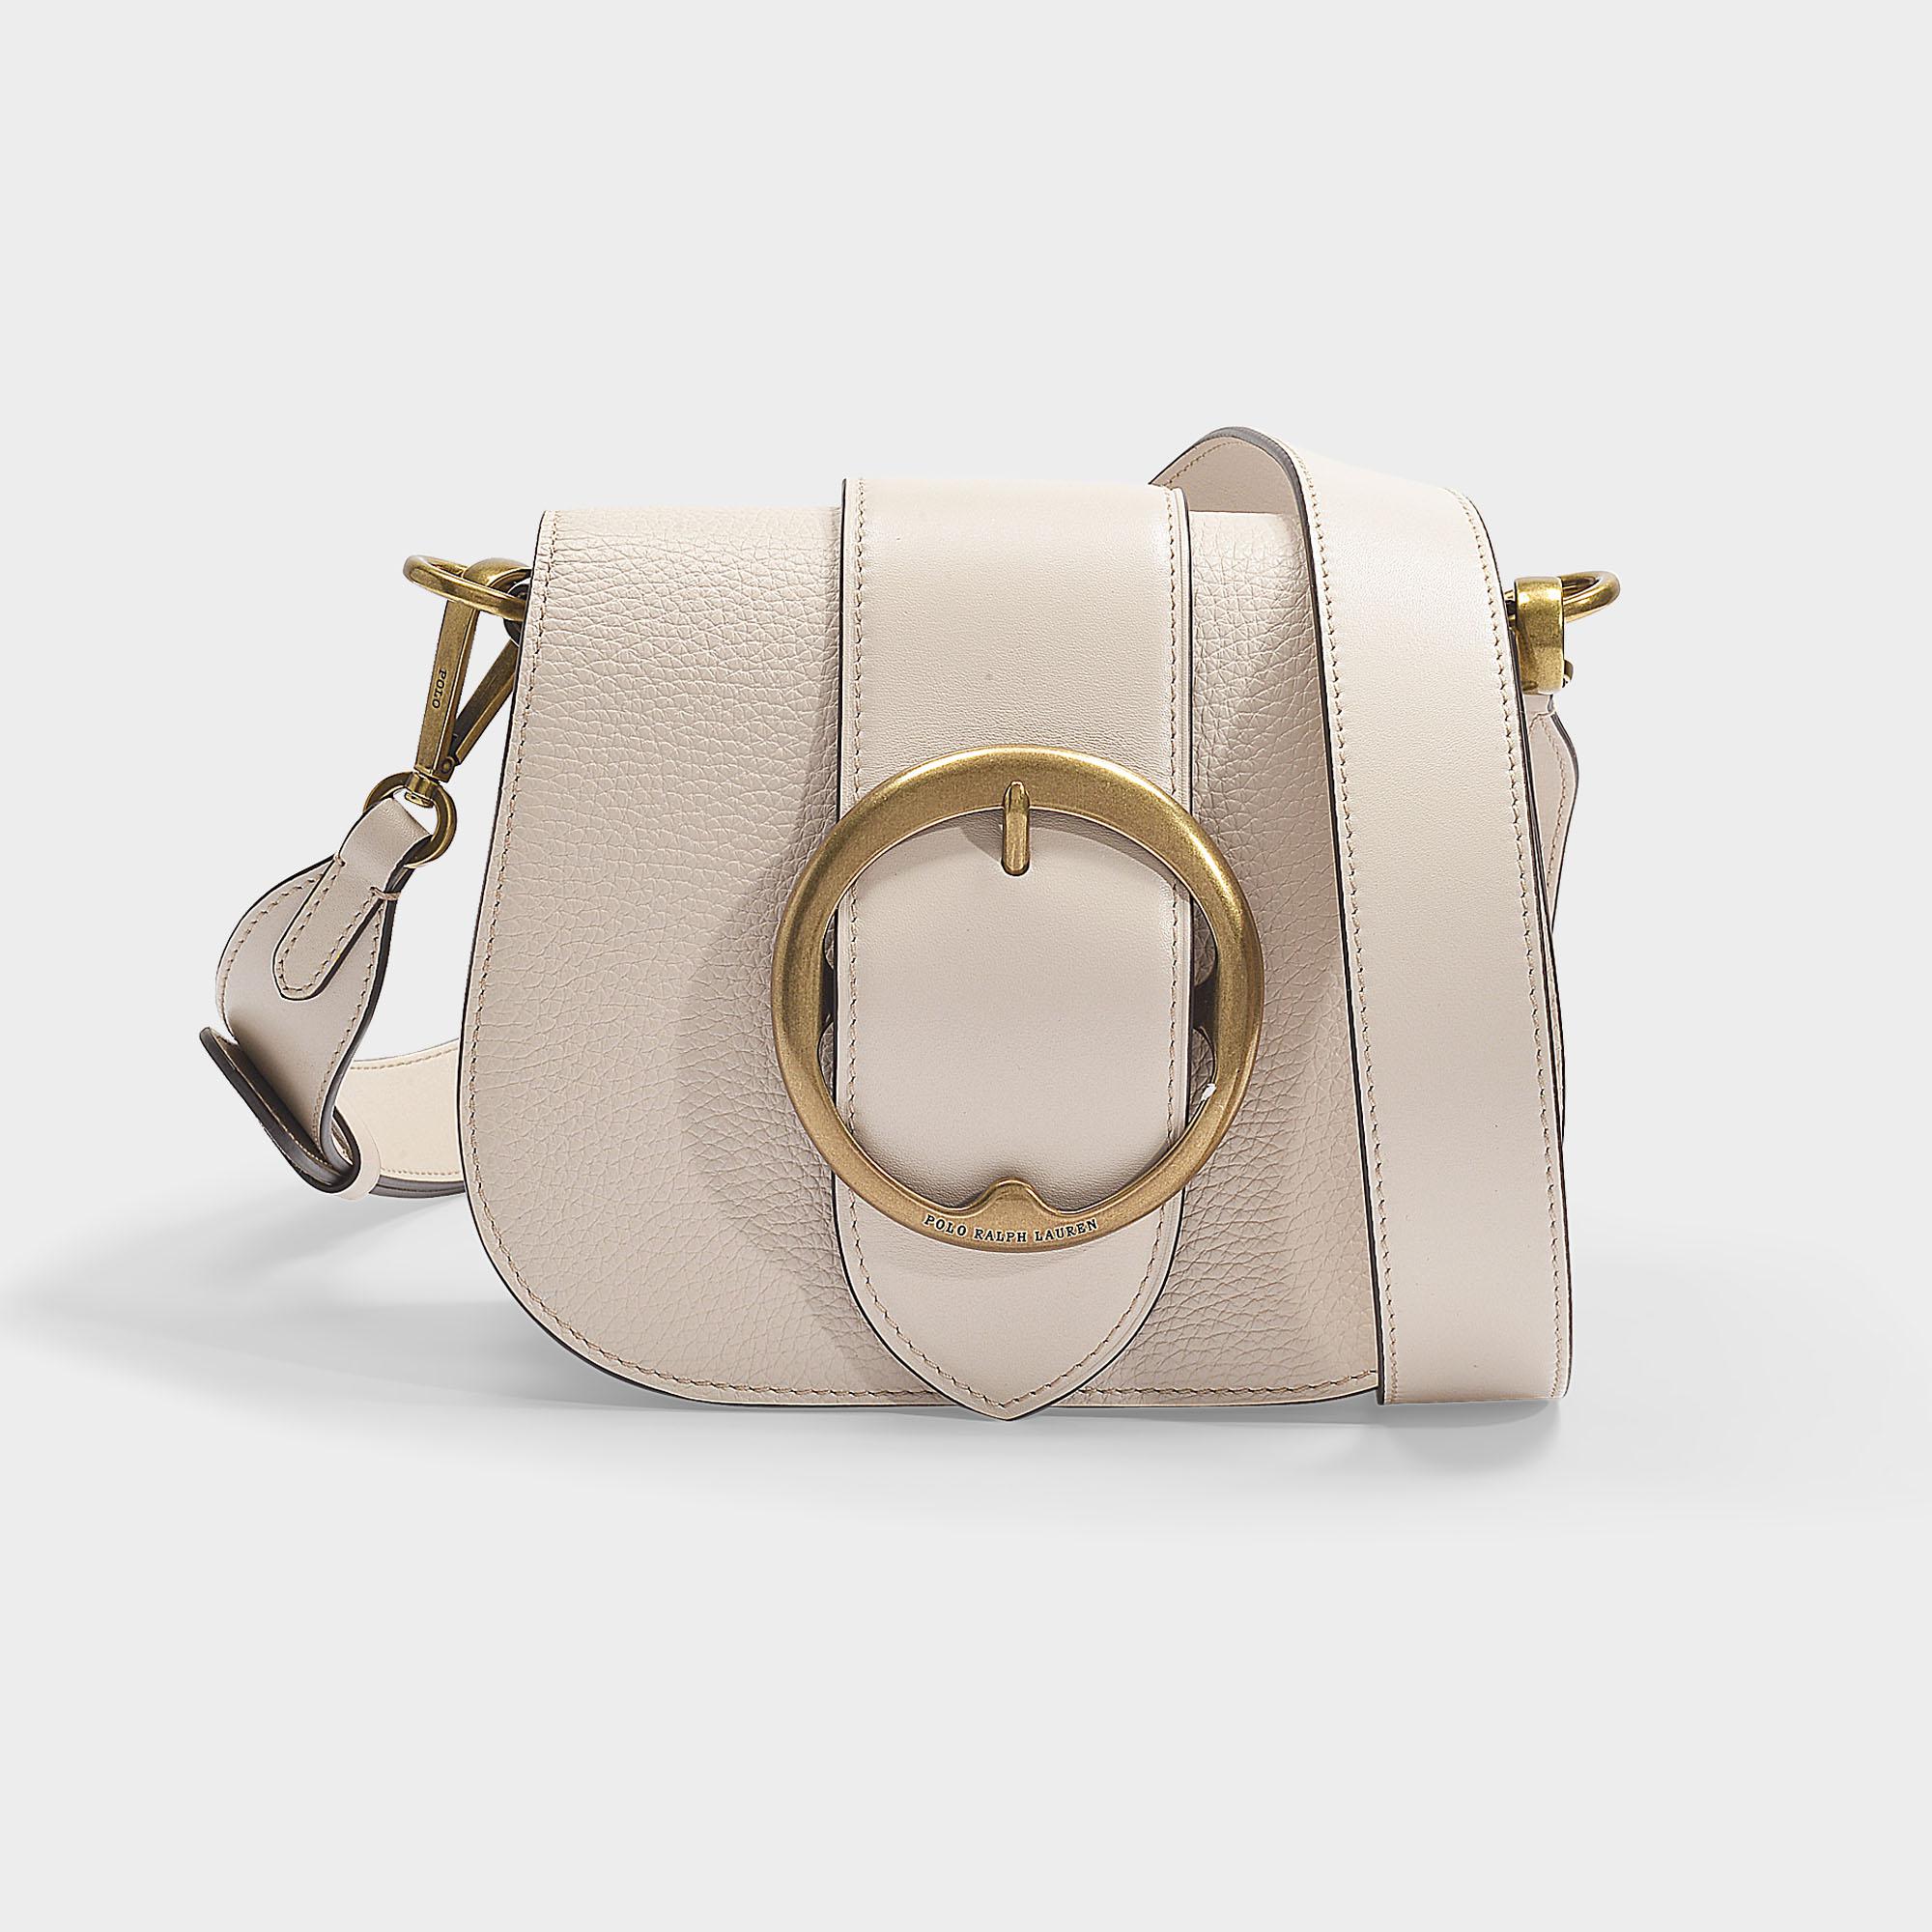 Ralph Lauren Pebbled Leather Lennox Bag in Natural | Lyst Canada